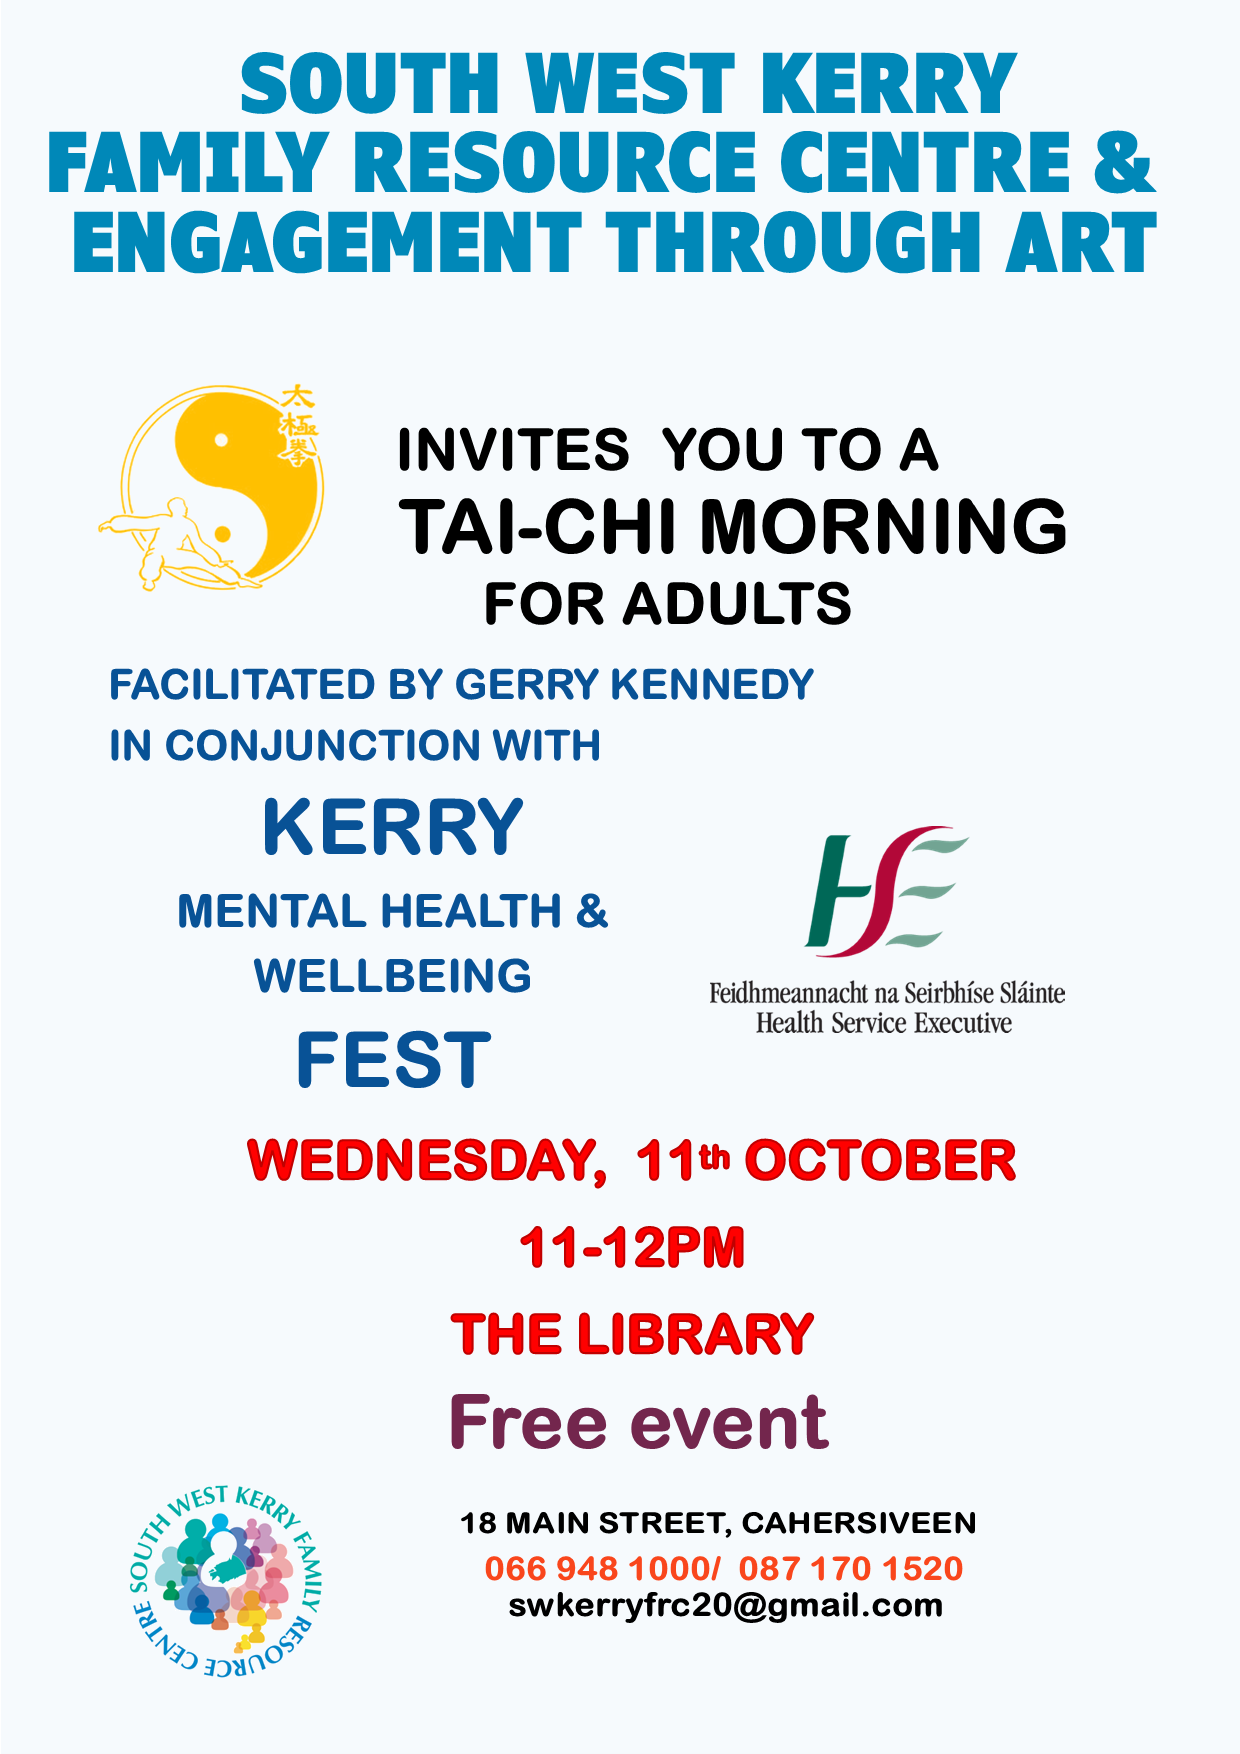 TAI- CHI Morning event at Kerry Mental Health & Wellbeing Fest 2022